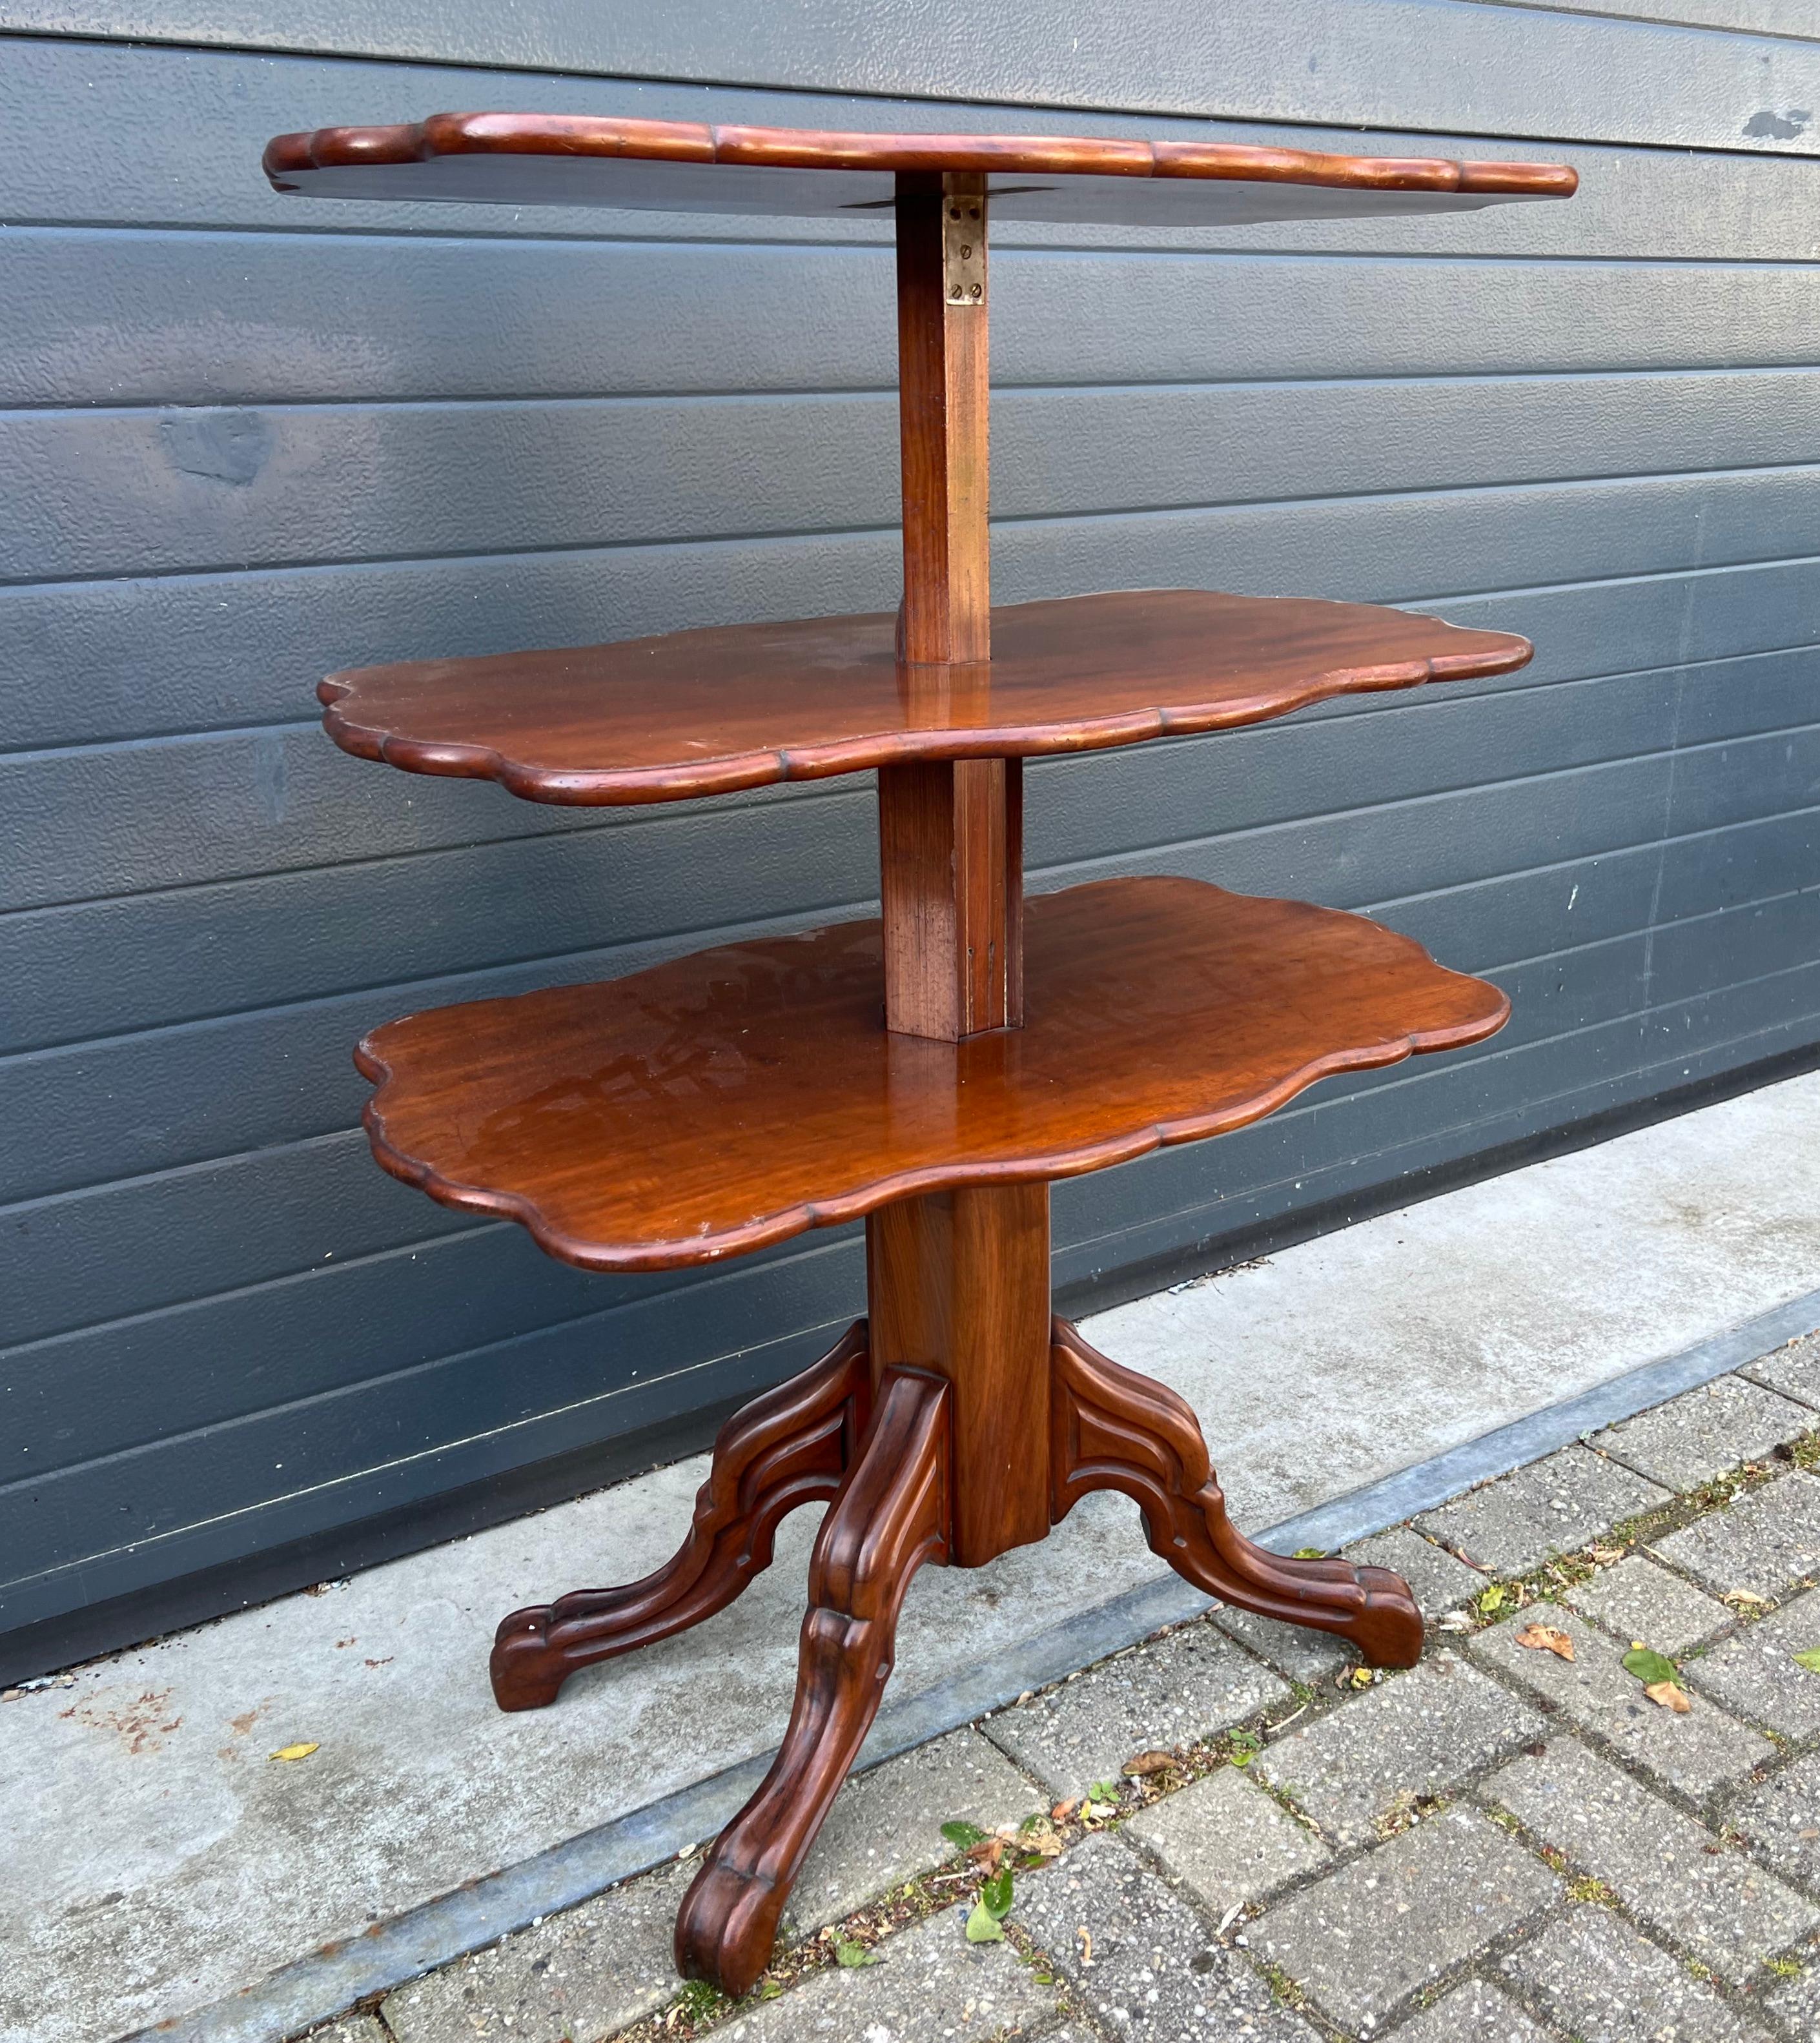 Extraordinary, handcrafted antique wooden dumbwaiter table, England.

This amazing quality and excellent condition table is another great example of the level of the workmanship that had been achieved in Europe in the late 1800s. All handcrafted and